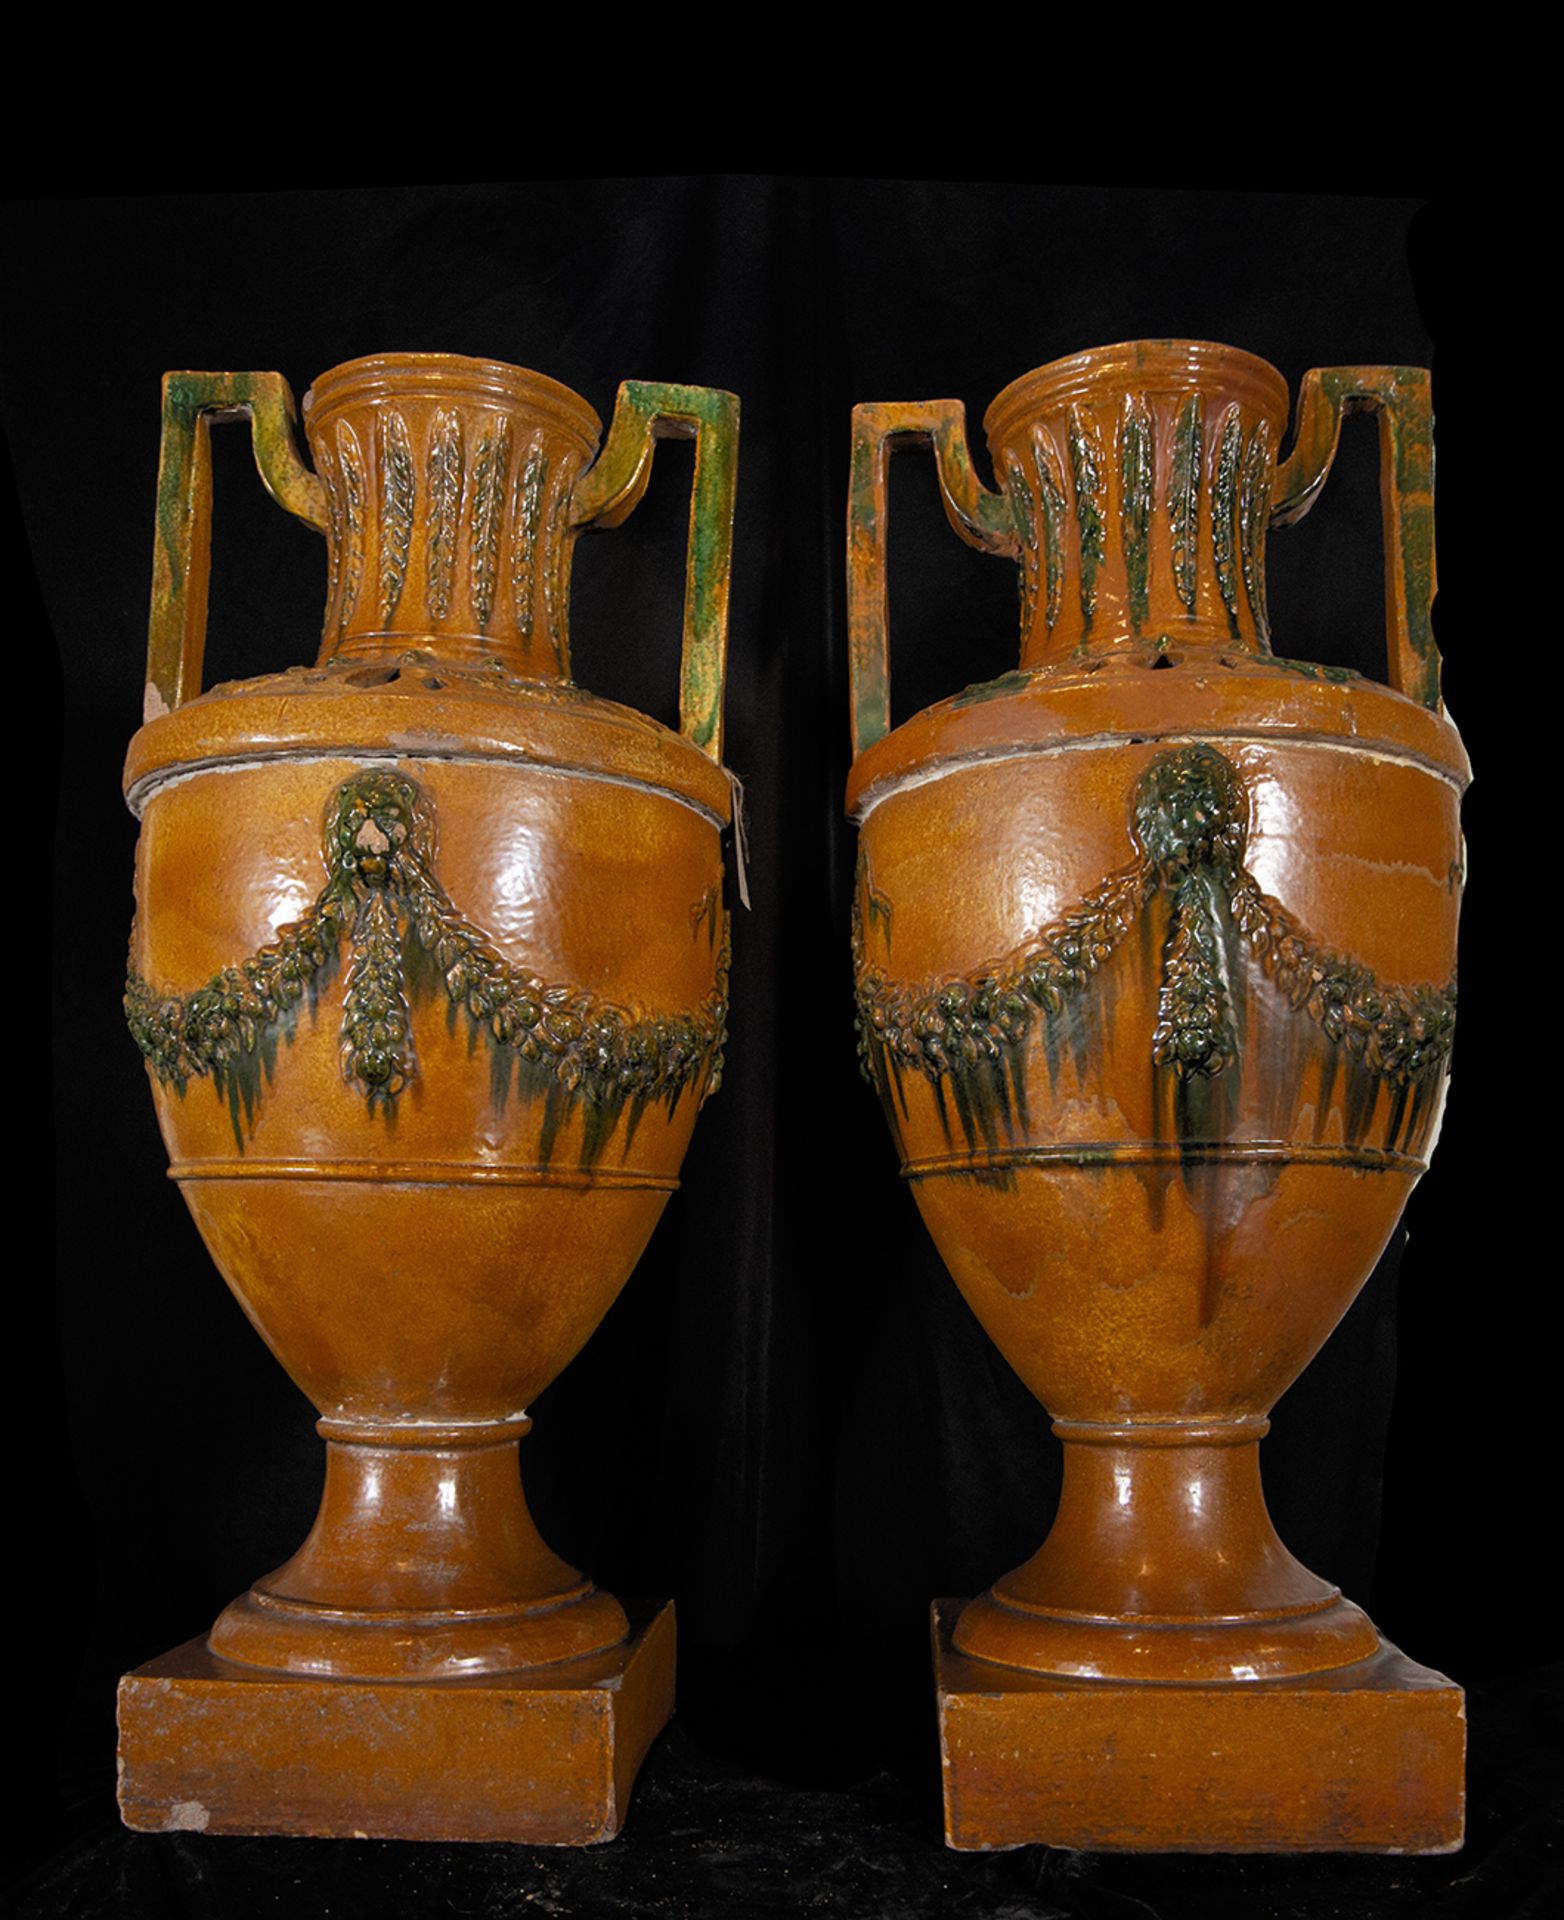 Pair of large and imposing Neoclassical style Vases or Jardinieres in glazed ceramic for Garden. 19t